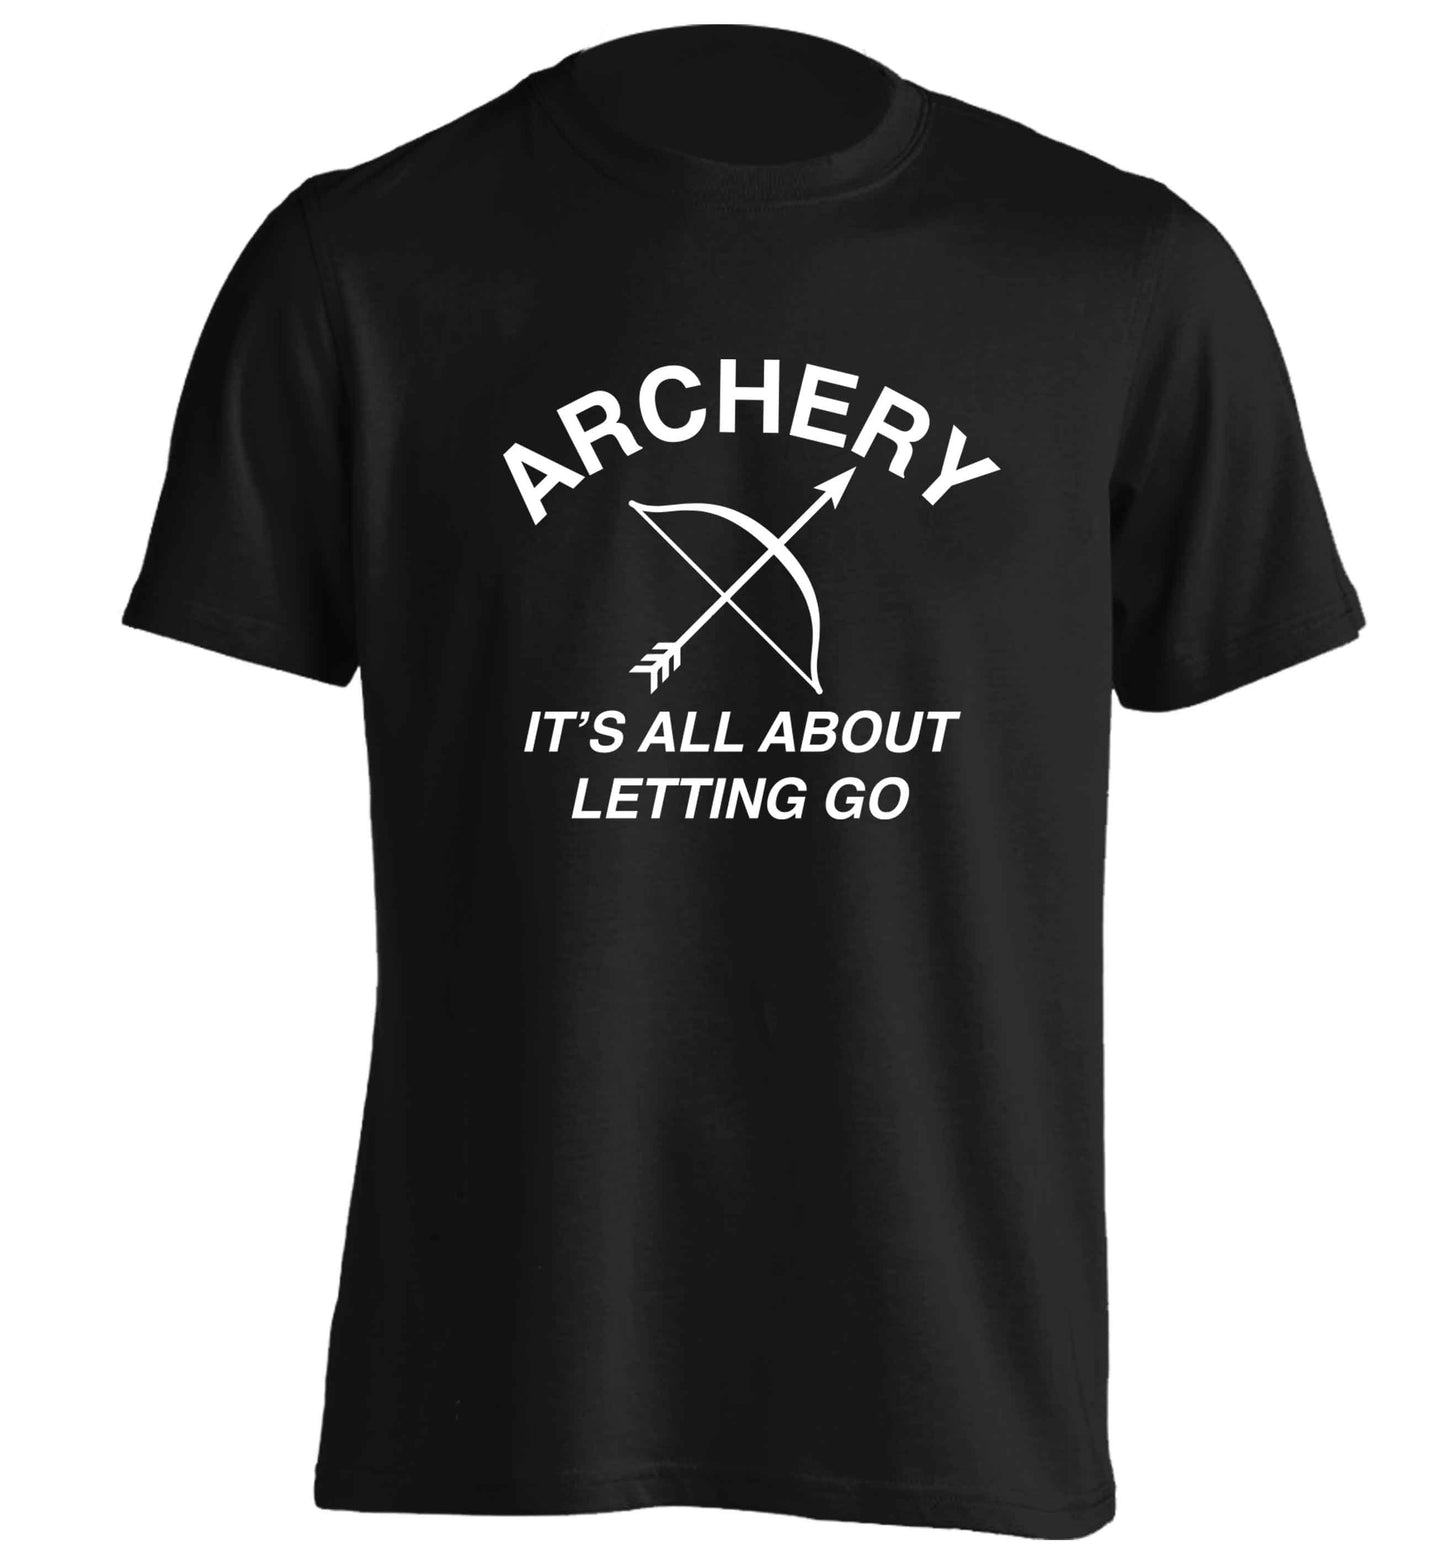 Archery it's all about letting go adults unisex black Tshirt 2XL